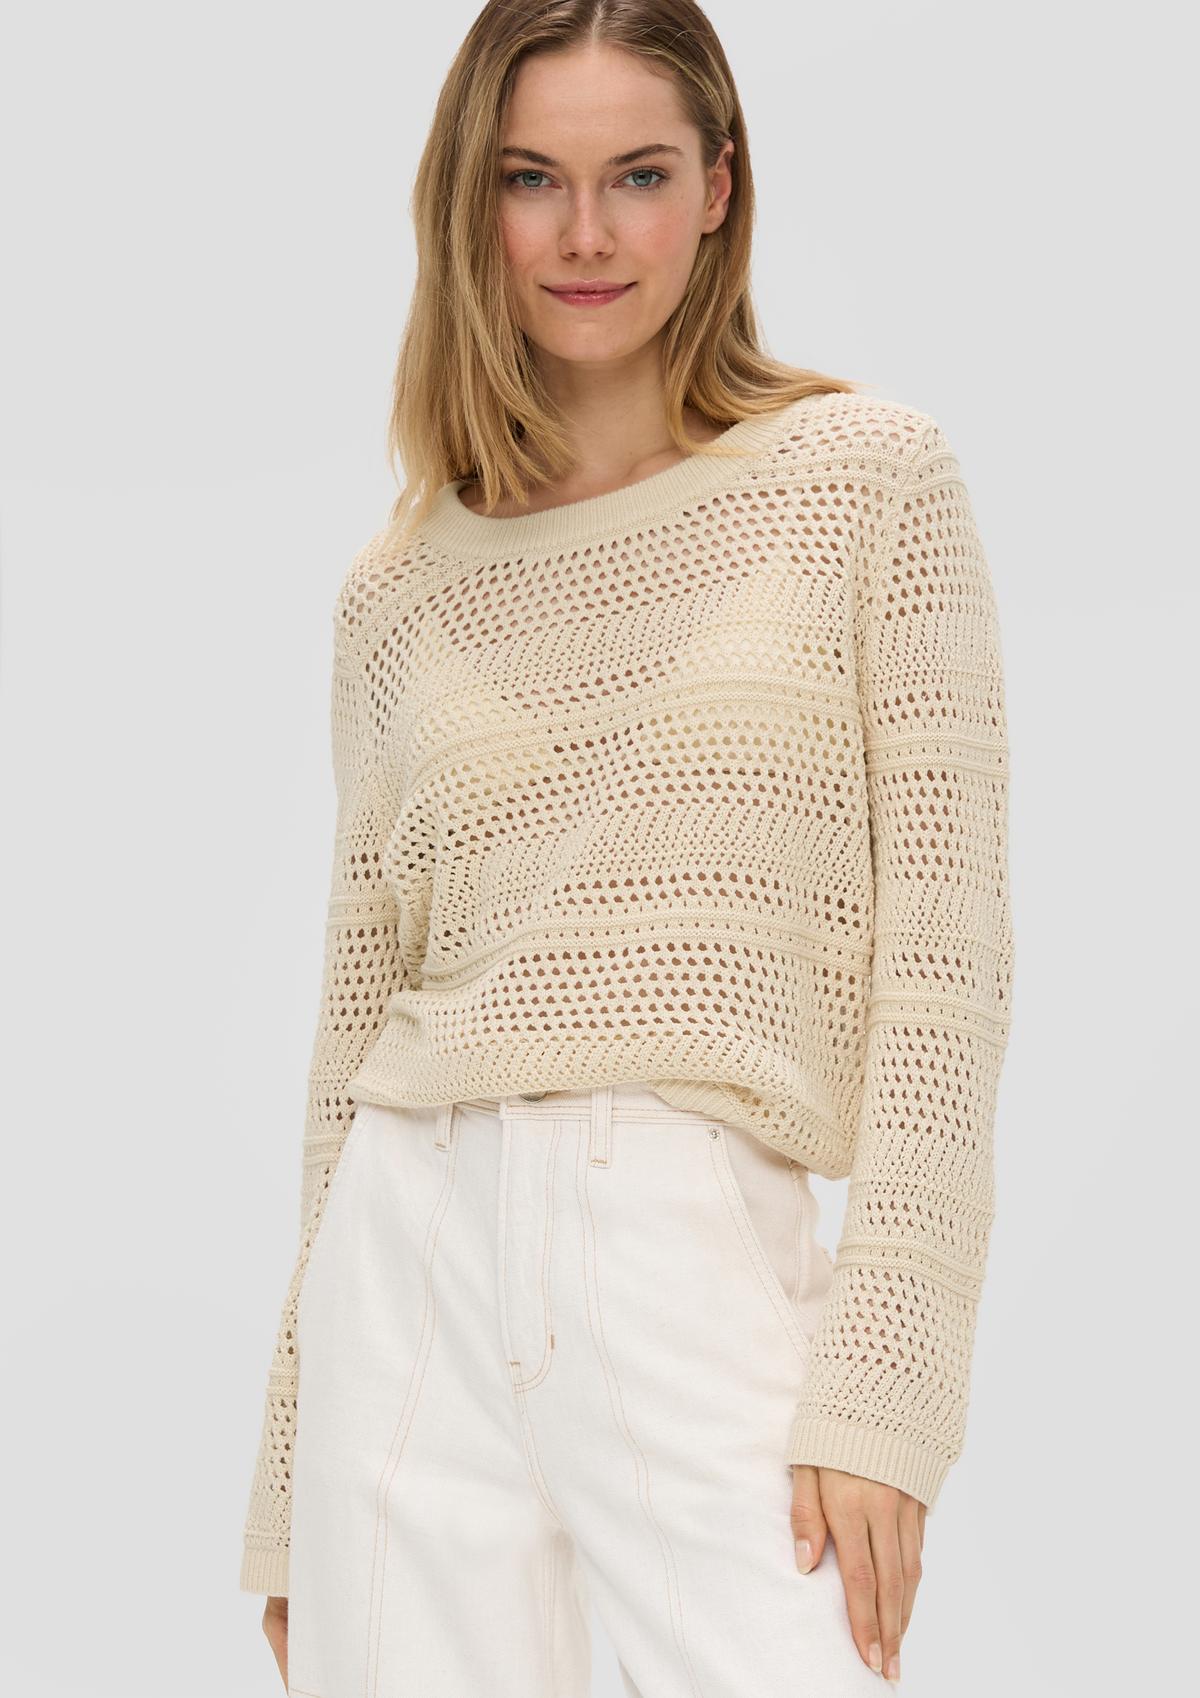 Jumper in a relaxed fit with an openwork pattern